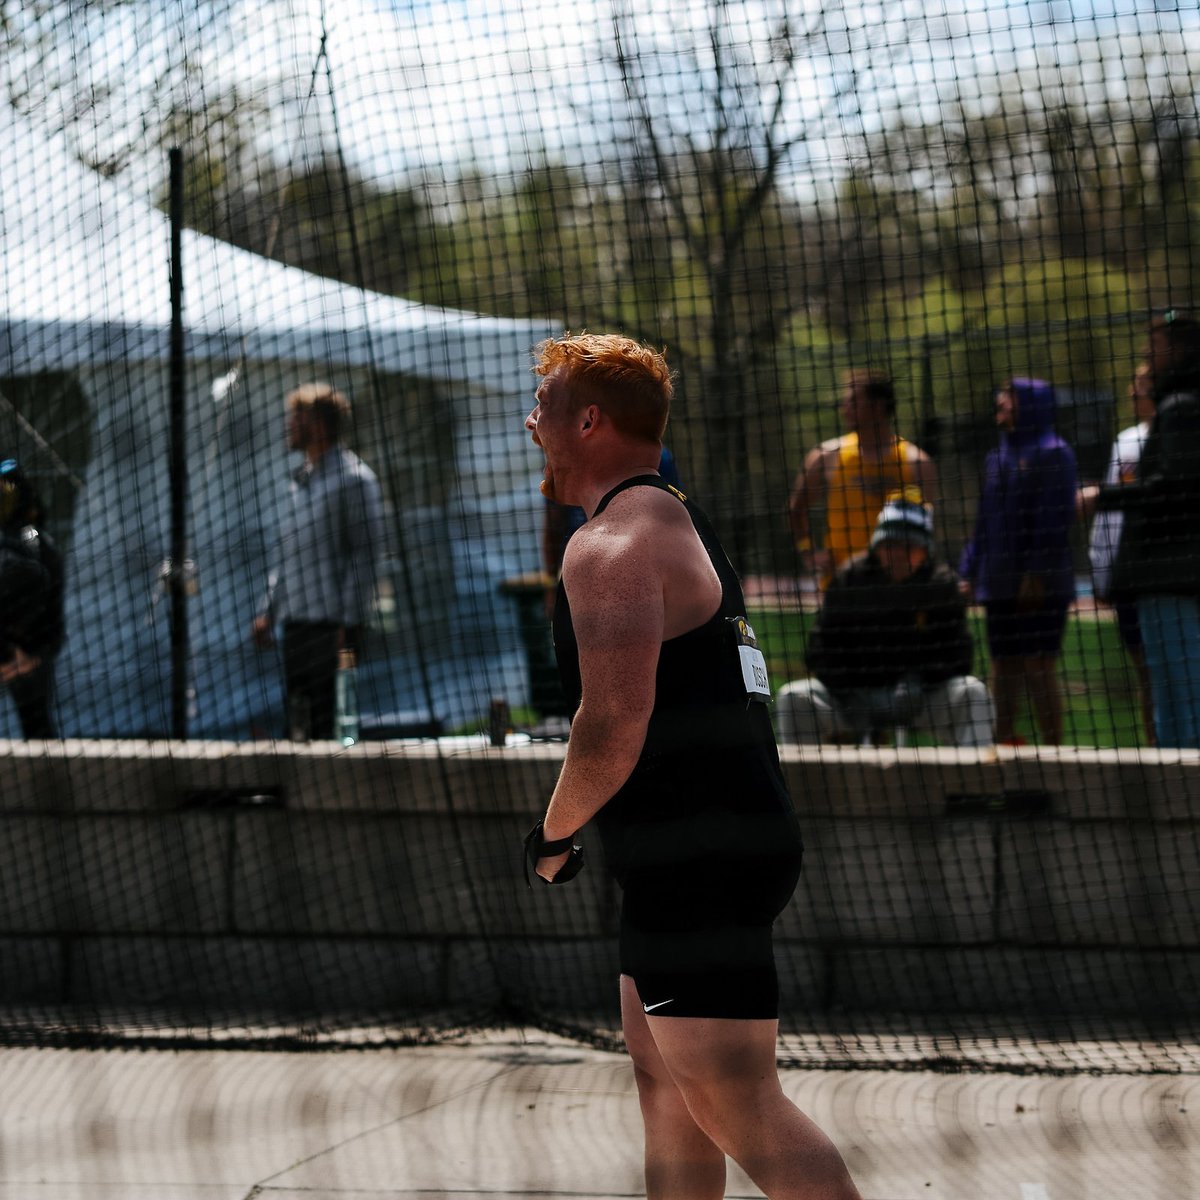 𝗠𝗼𝘃𝗶𝗻' 𝗢𝗻 𝗨𝗽 📈 𝙎𝙚𝙖𝙣 𝙎𝙢𝙞𝙩𝙝 and 𝘼𝙪𝙨𝙩𝙞𝙣 𝘽𝙪𝙨𝙘𝙝 finish 1-2 in the men's hammer and move up Iowa's all-time list! 1. Sean Smith - 67.78 meters, PR + 2nd at Iowa 2. Austin Busch - 65.22 meters, PR + 5th at Iowa 10. Walker Whalen - 51.32 meters #Hawkeyes